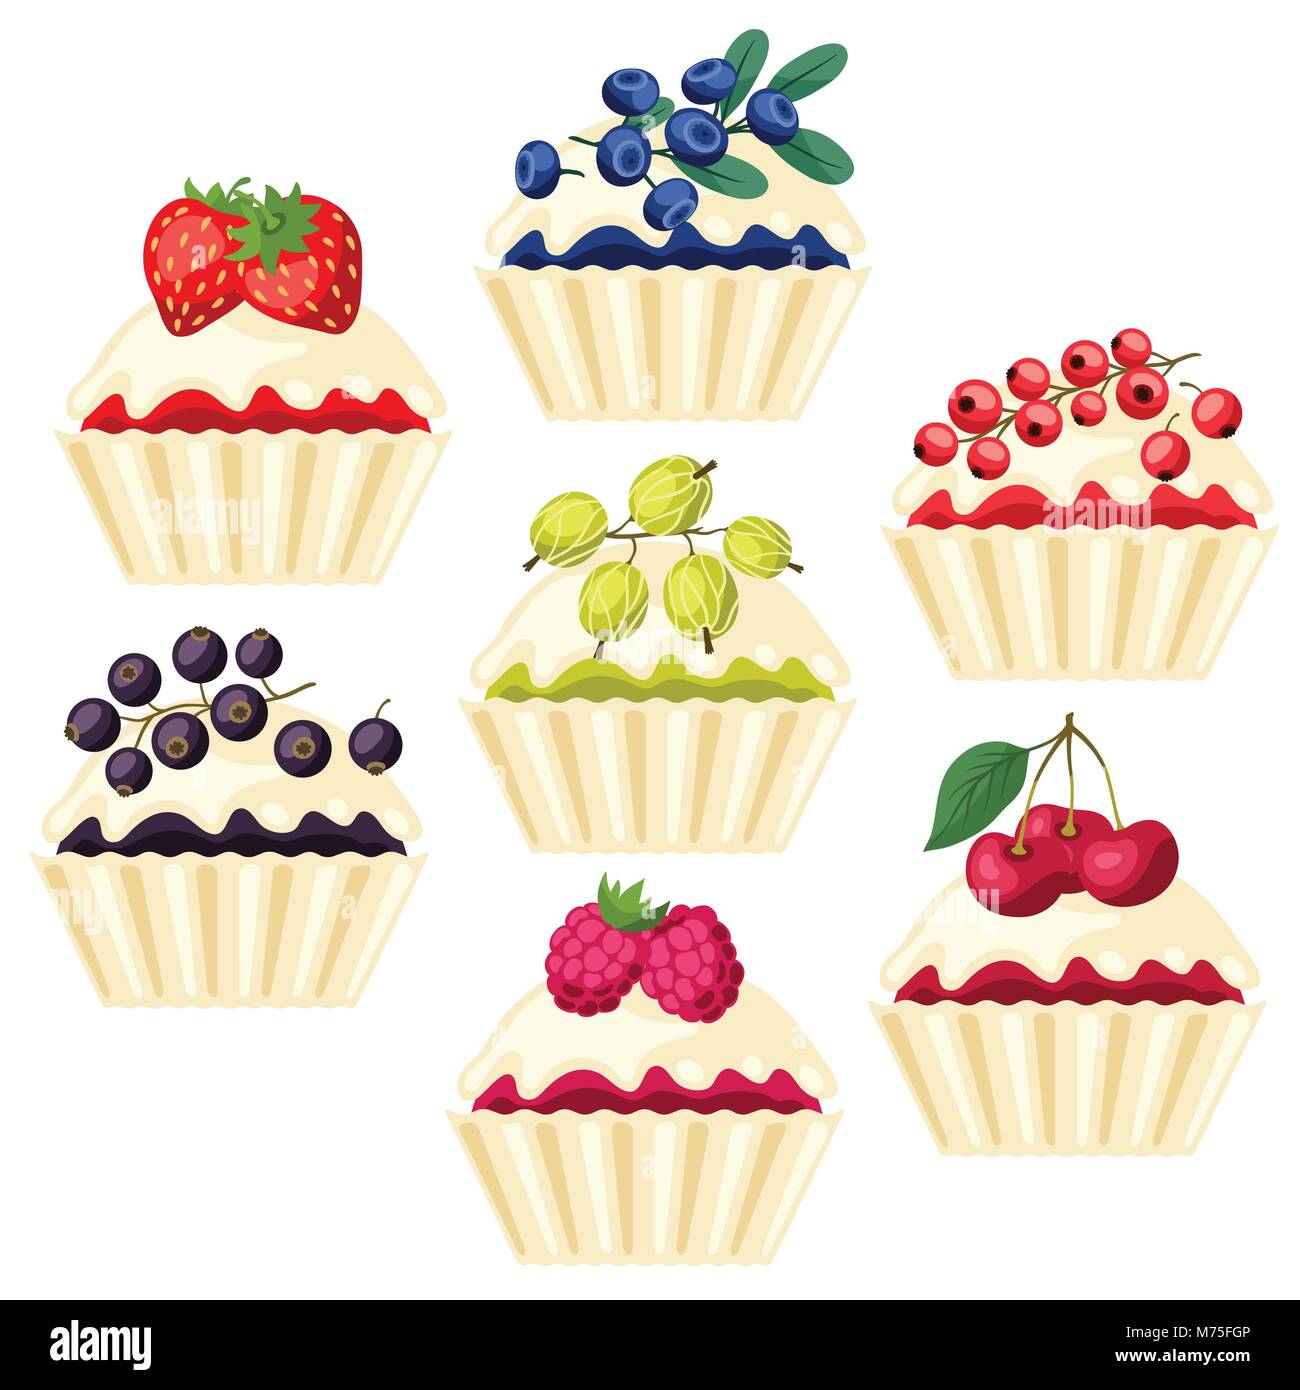 Set of cupcakes with various filling. Stock Vector